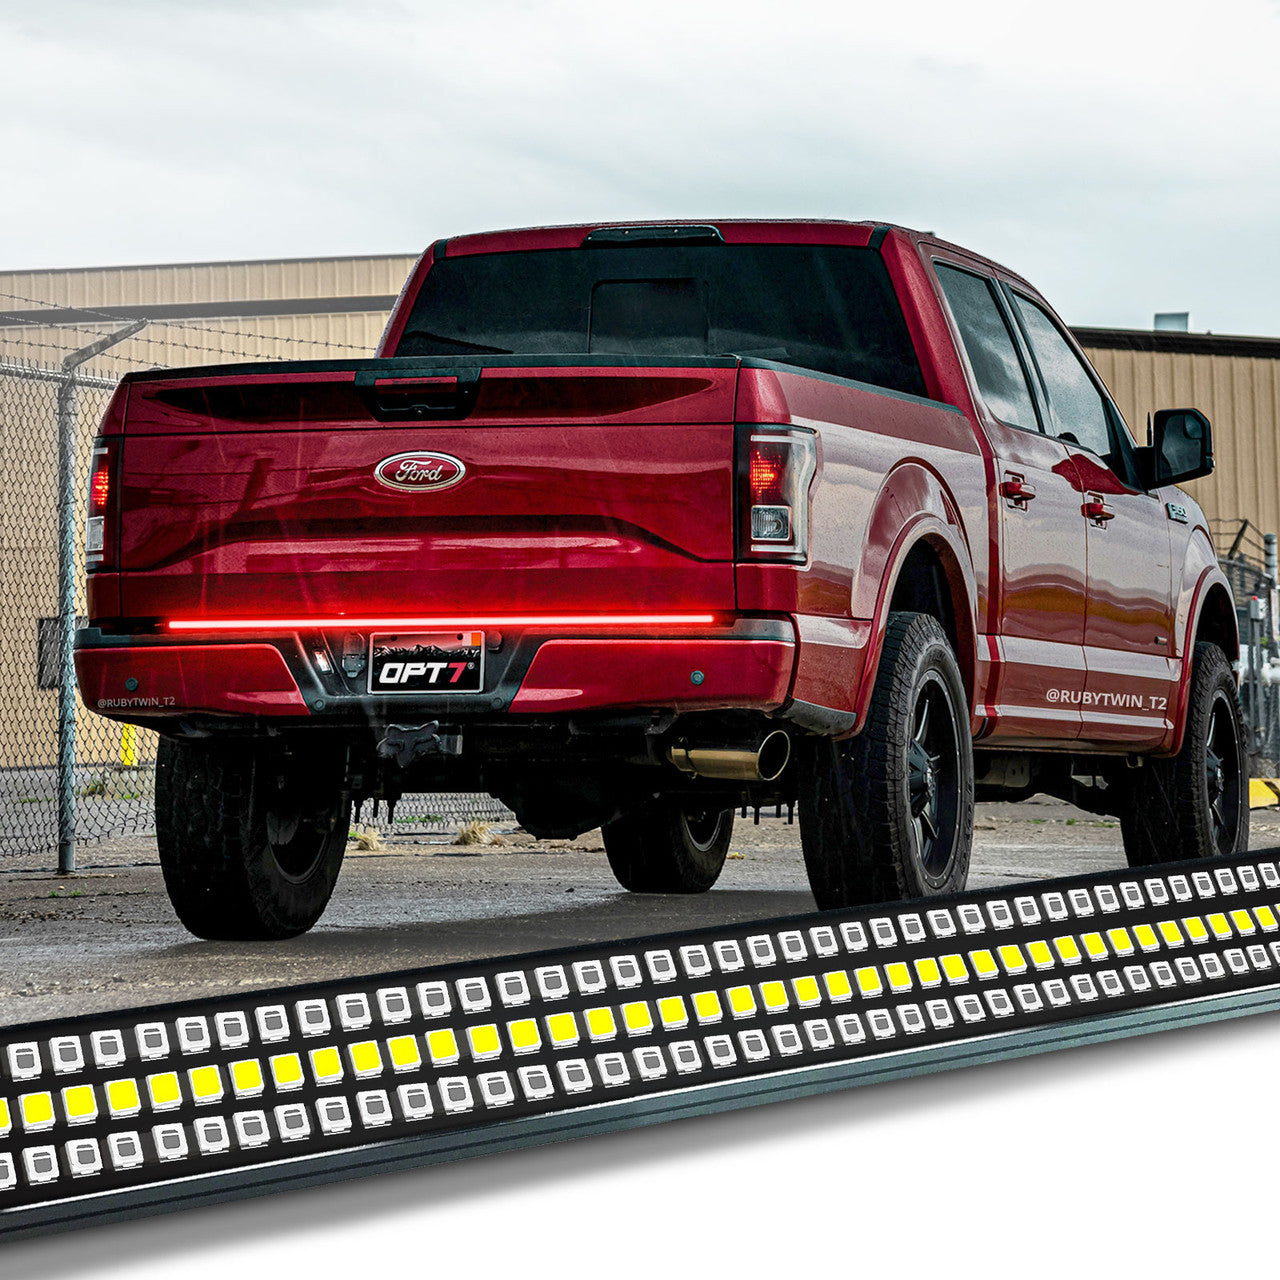 Tailgate Light Bar with Triple LED Reverse | Opt7 Redline 60 Red / Yes. Protect ME. (See Below for Details)